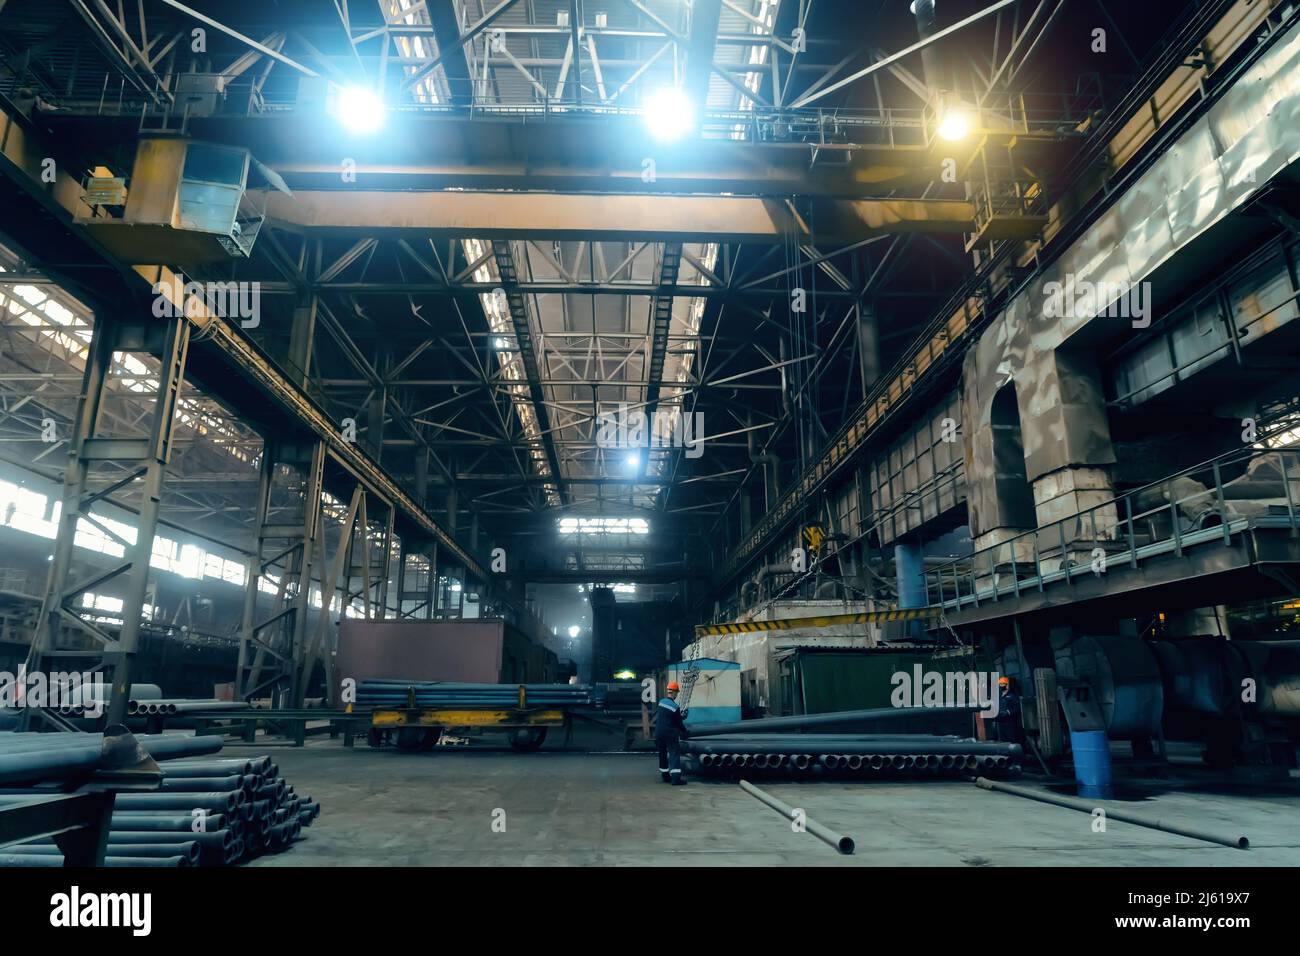 Large girder or beam crane transports iron pipes inside large dark workshop in metallurgical factory. Stock Photo